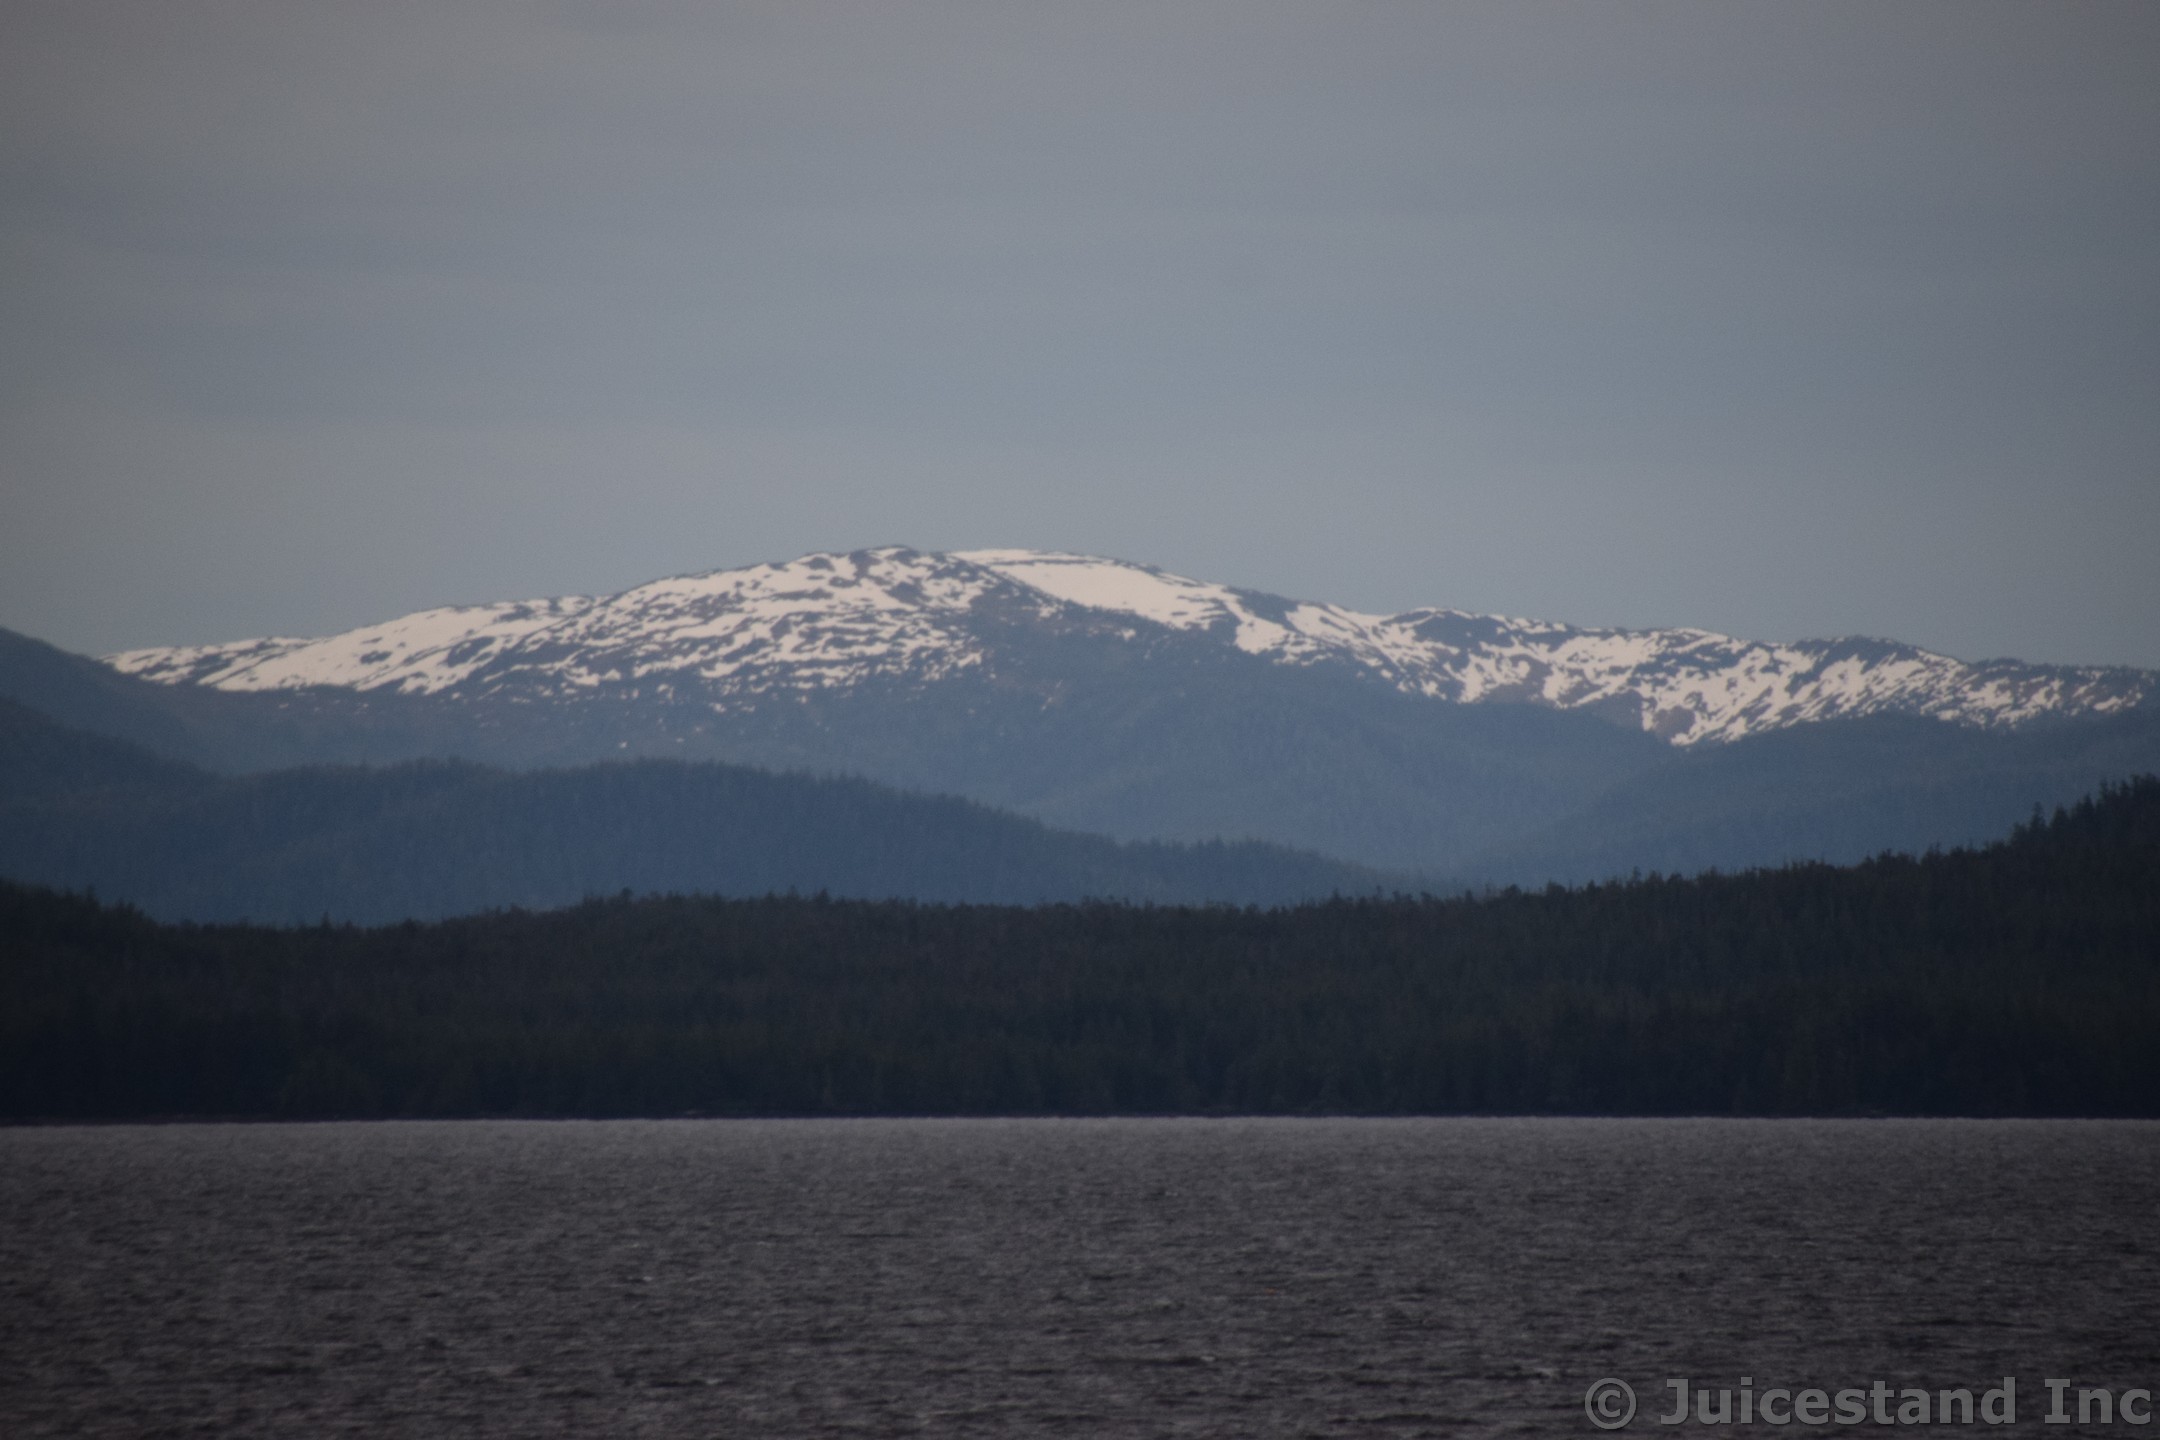 Snow Peaked Moutains and Alpine Forests near Ketchikan Alaska
